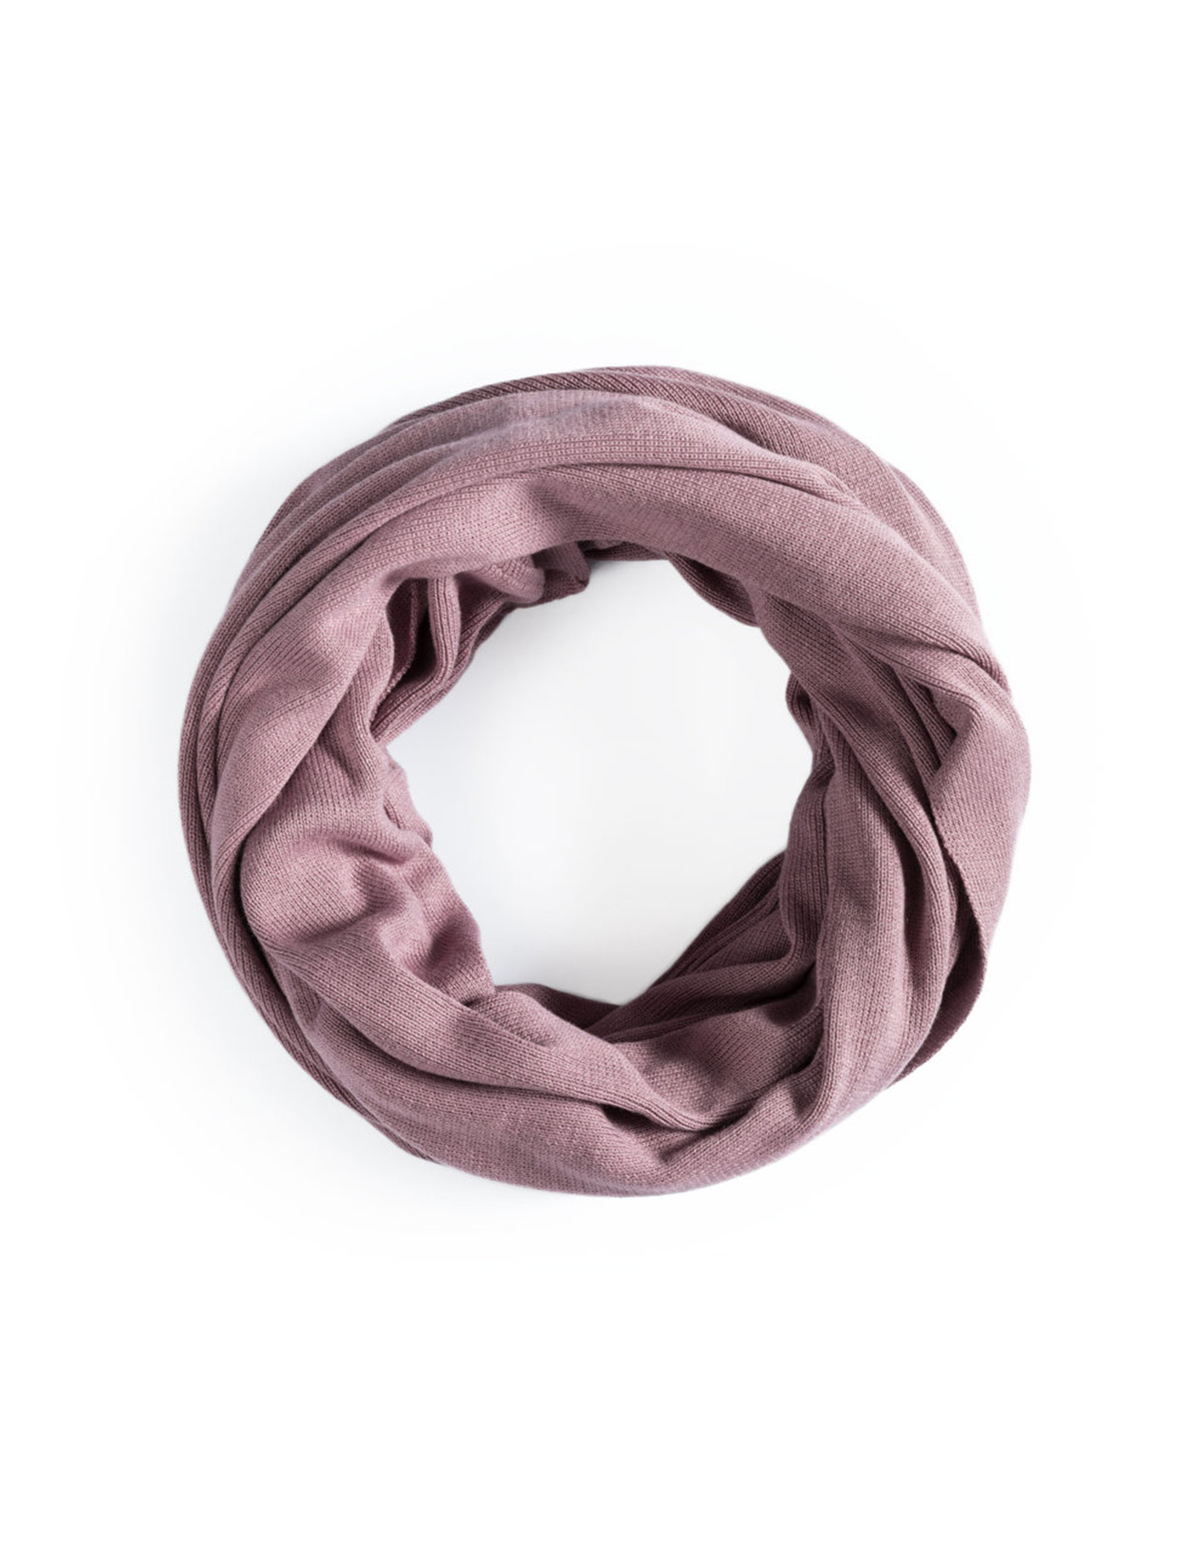 Cotton blend scarf by
Isolde Roth